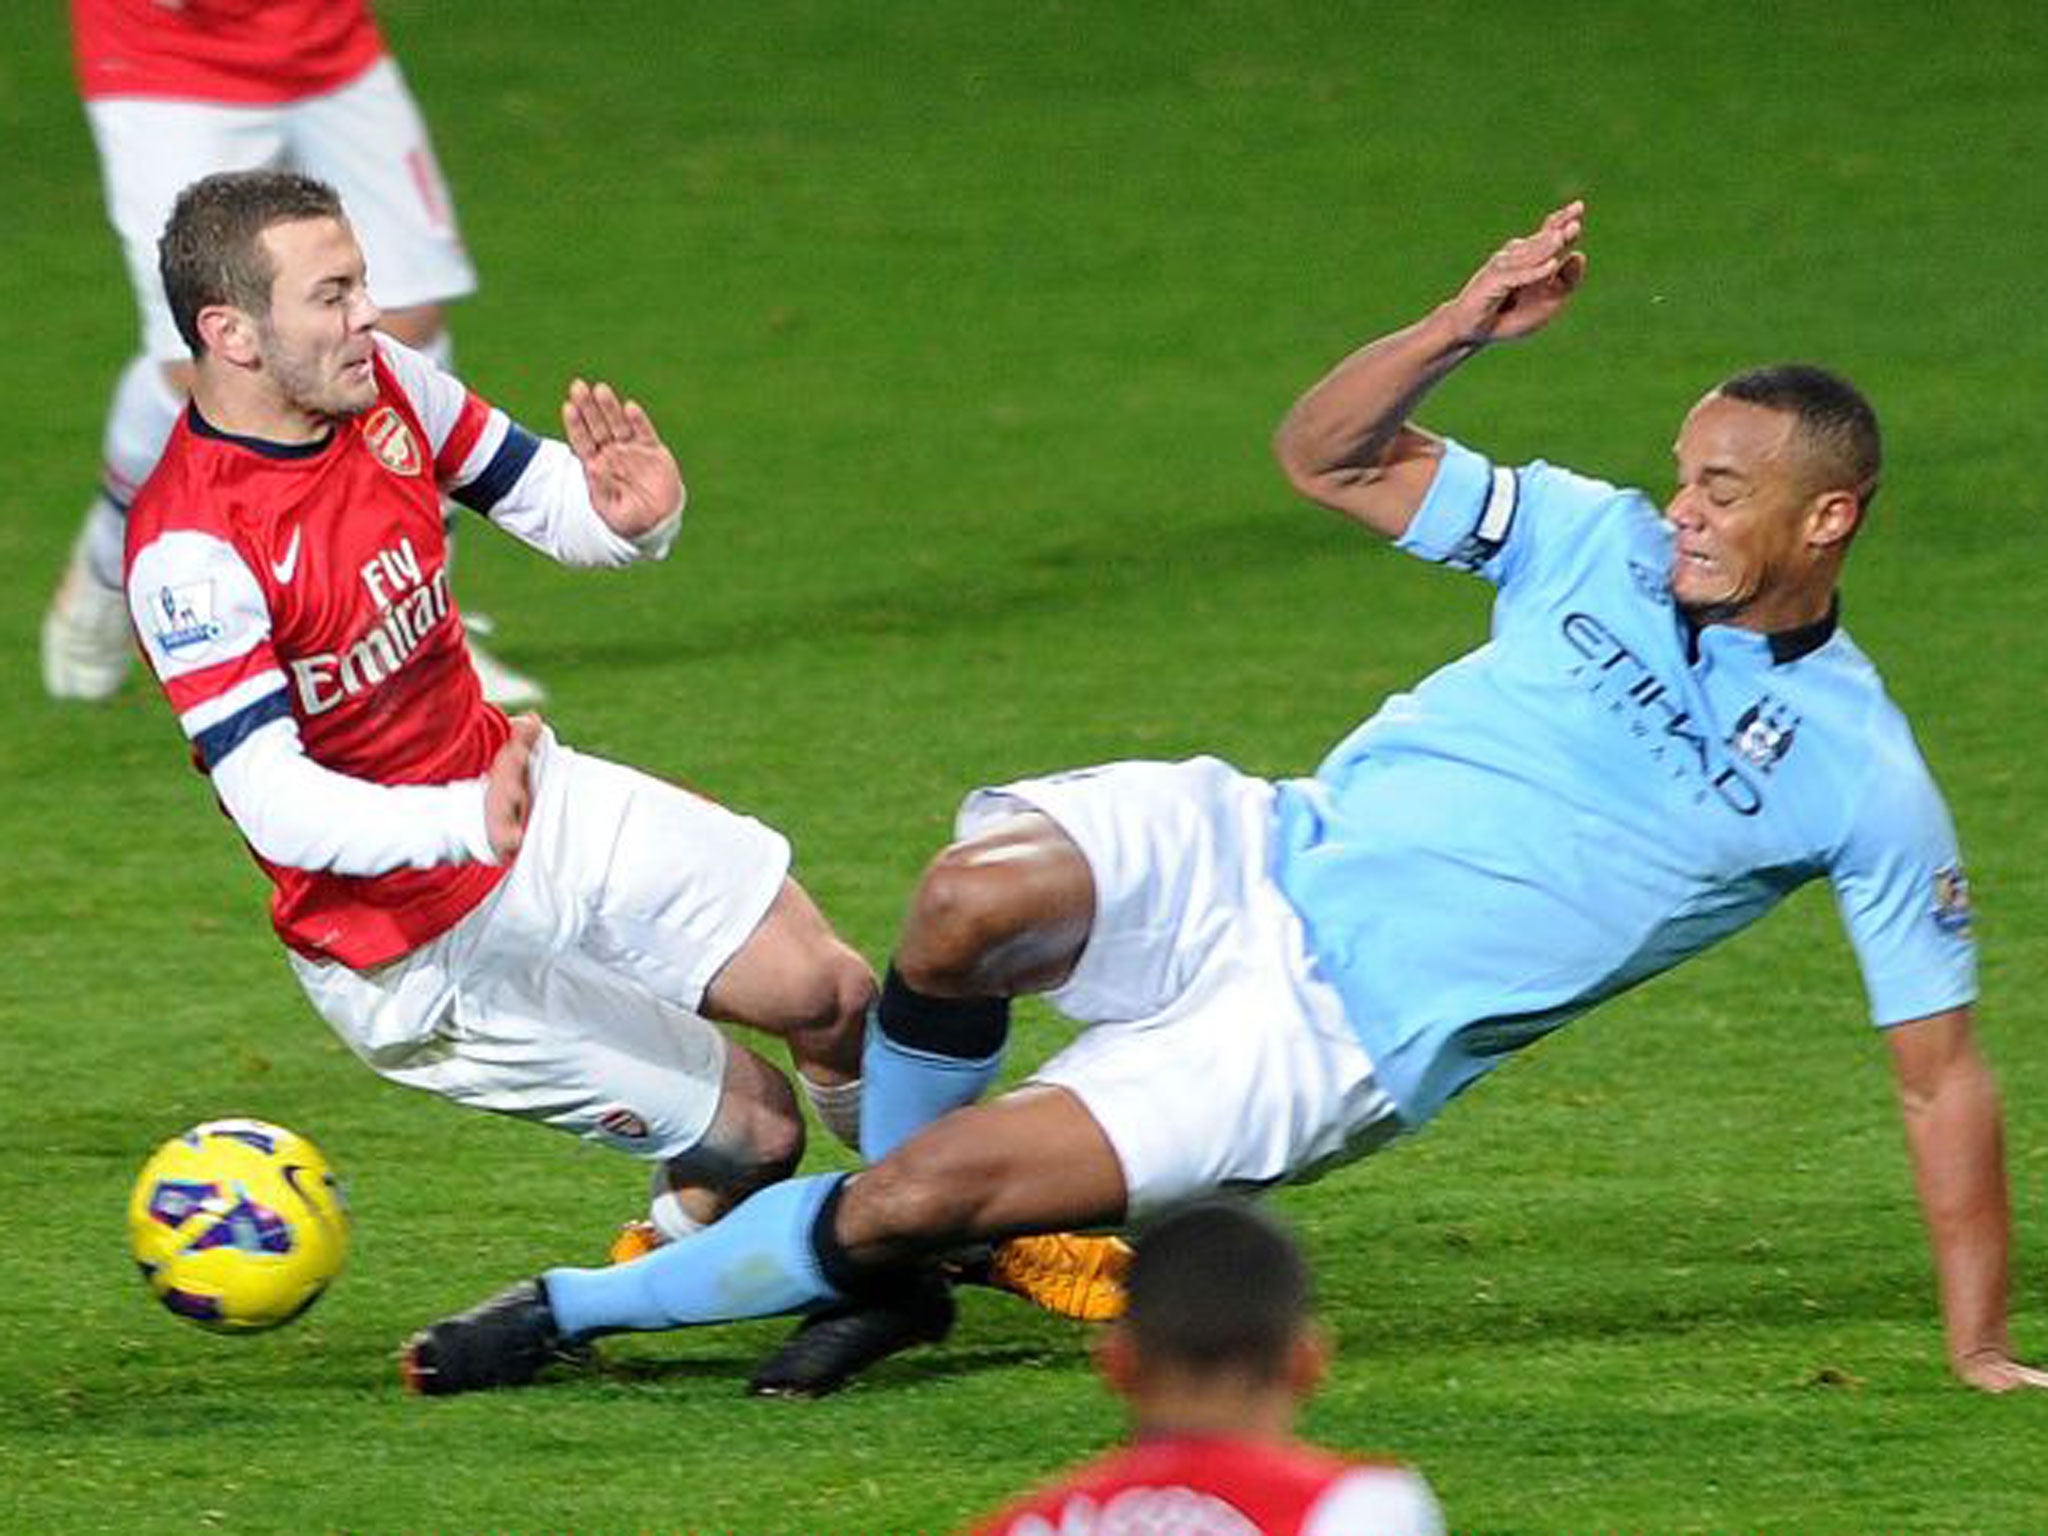 Vincent Kompany (right) has been told to tackle more carefully